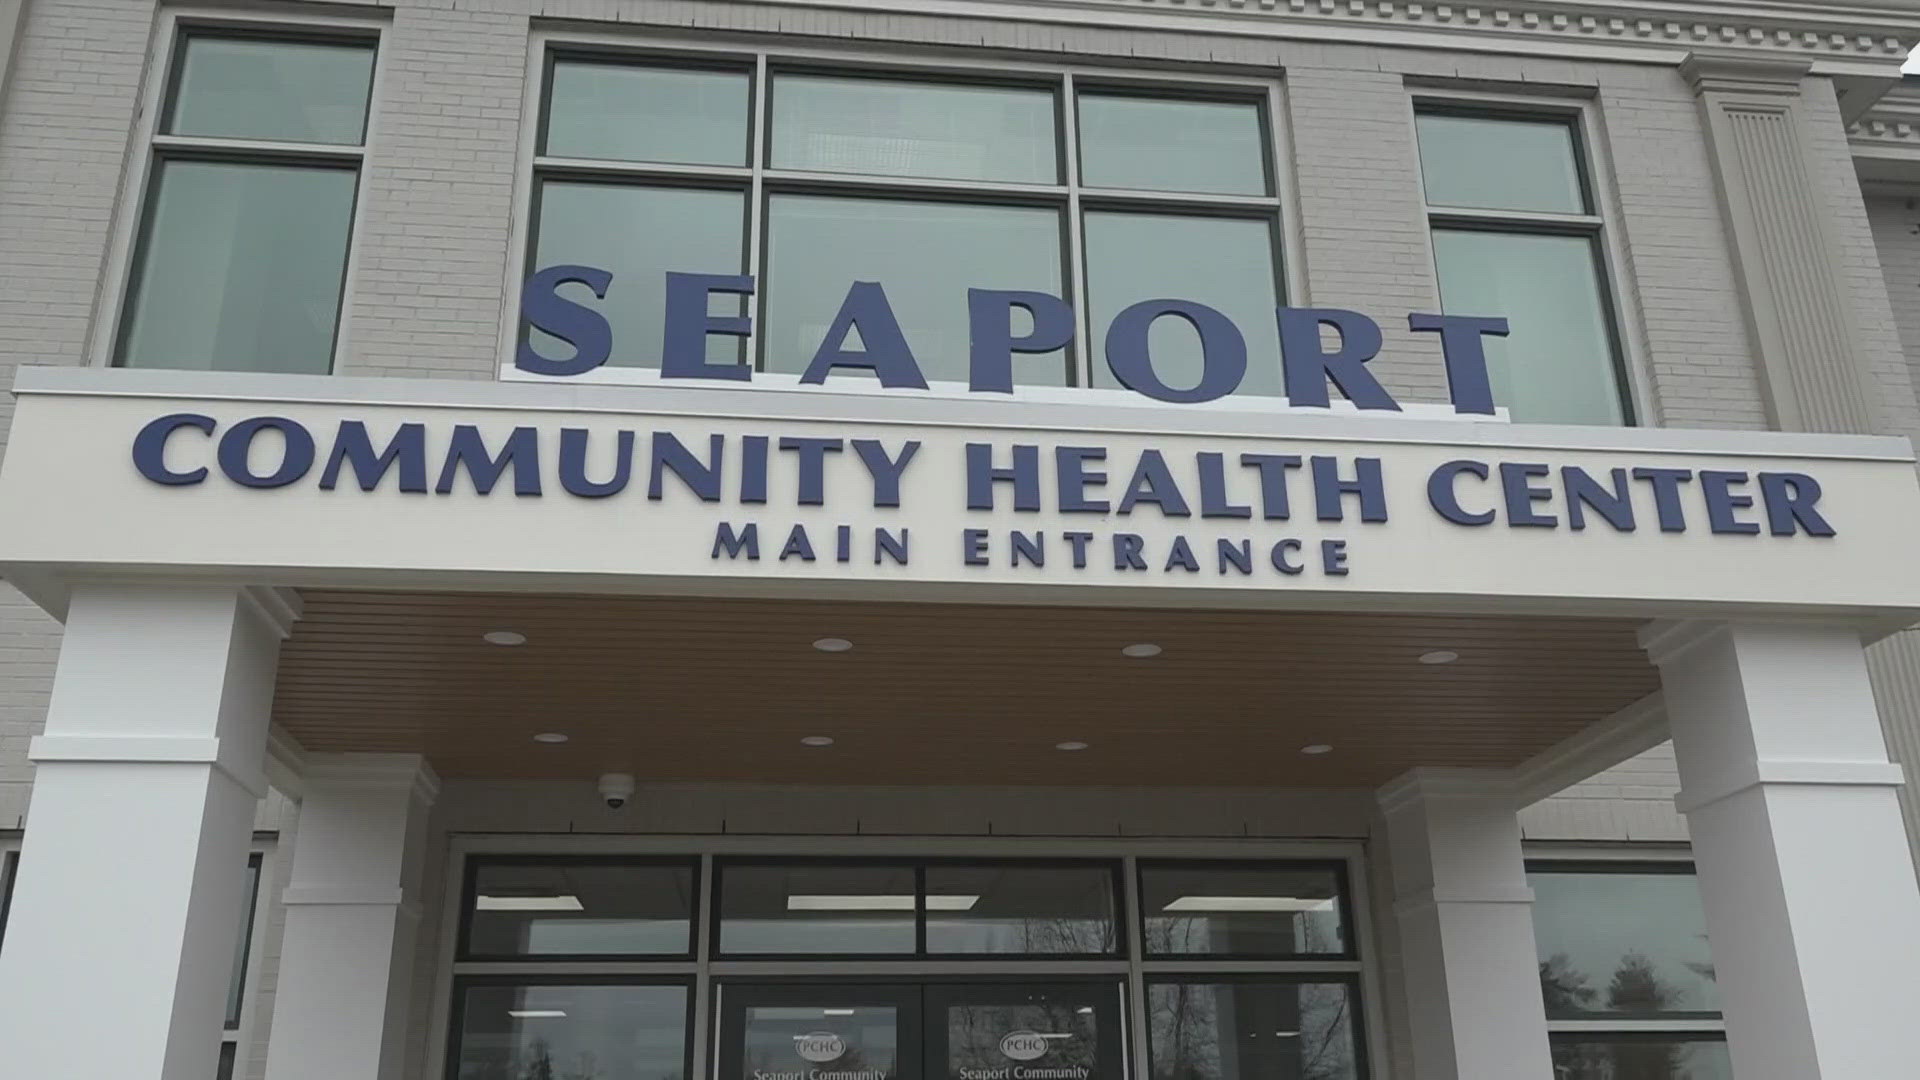 The Seaport Community Health Center has moved to a new bigger location and is now open for business.